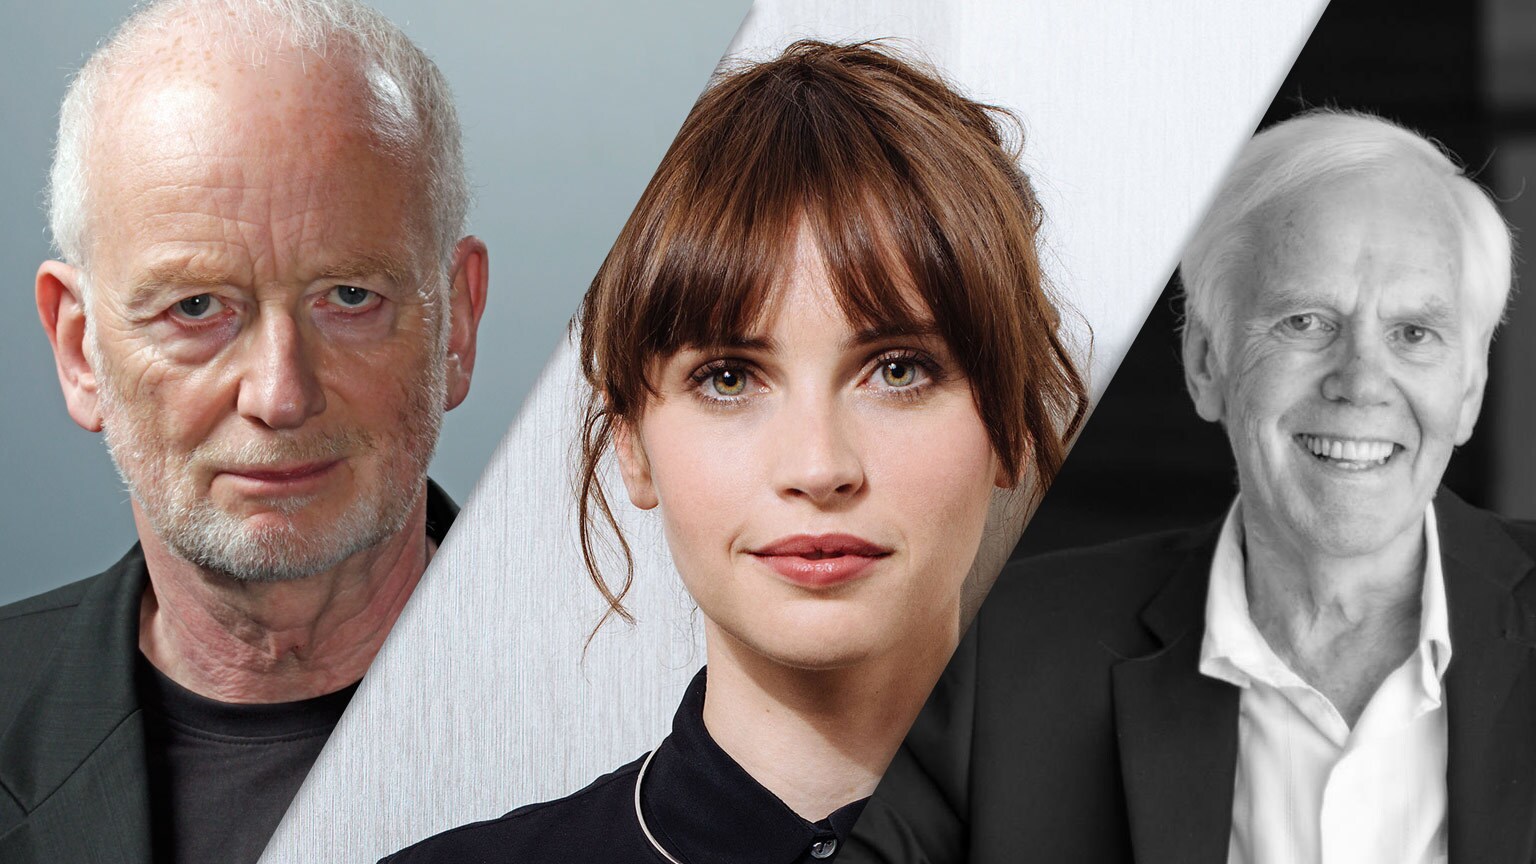 Rogue One’s Felicity Jones to Appear at Star Wars Celebration in Orlando